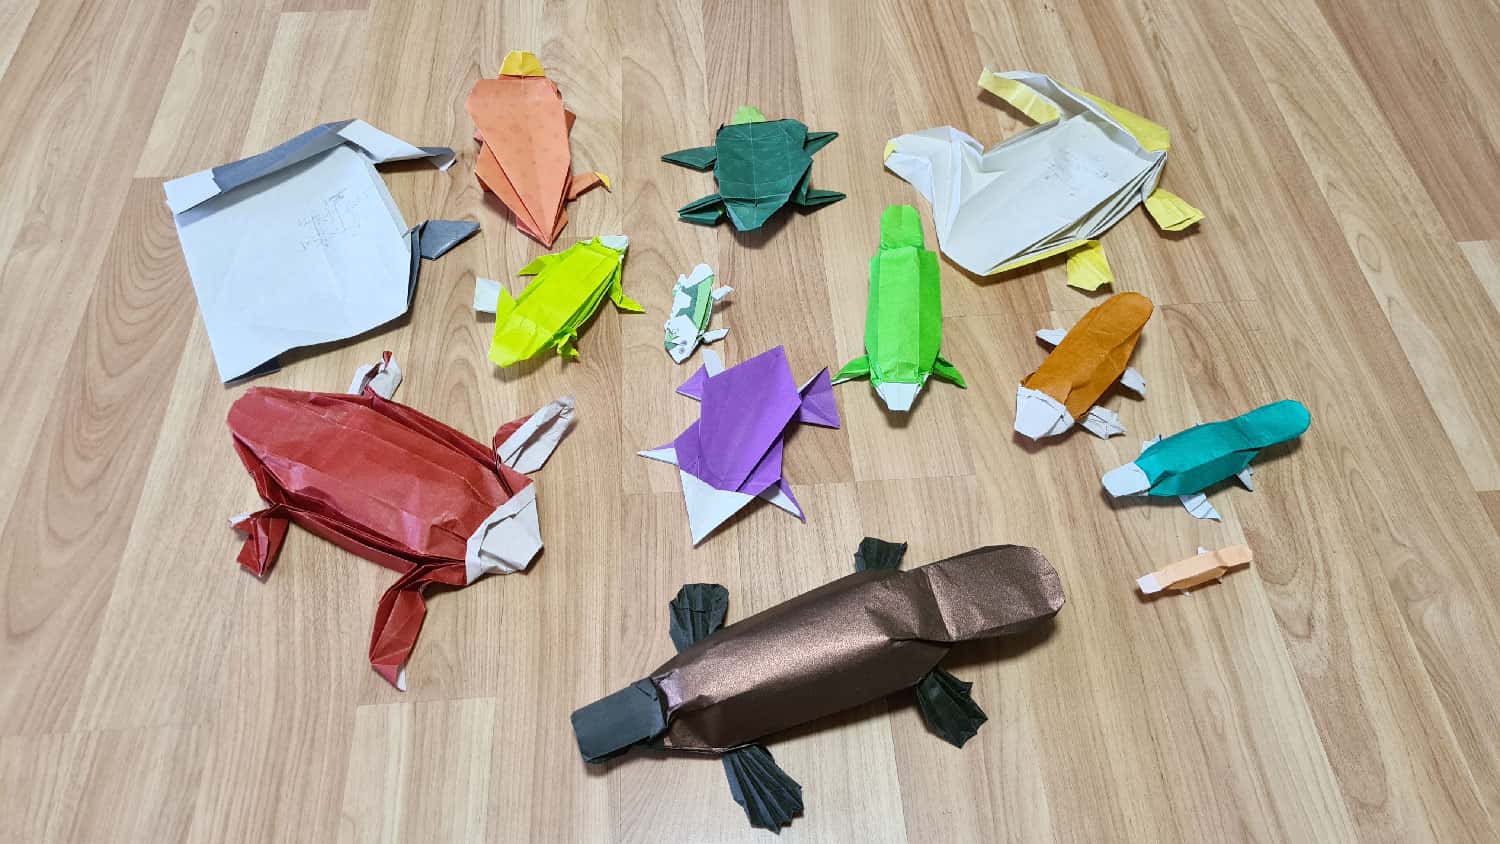 13 folded origami platypus models, with varying levels of quality